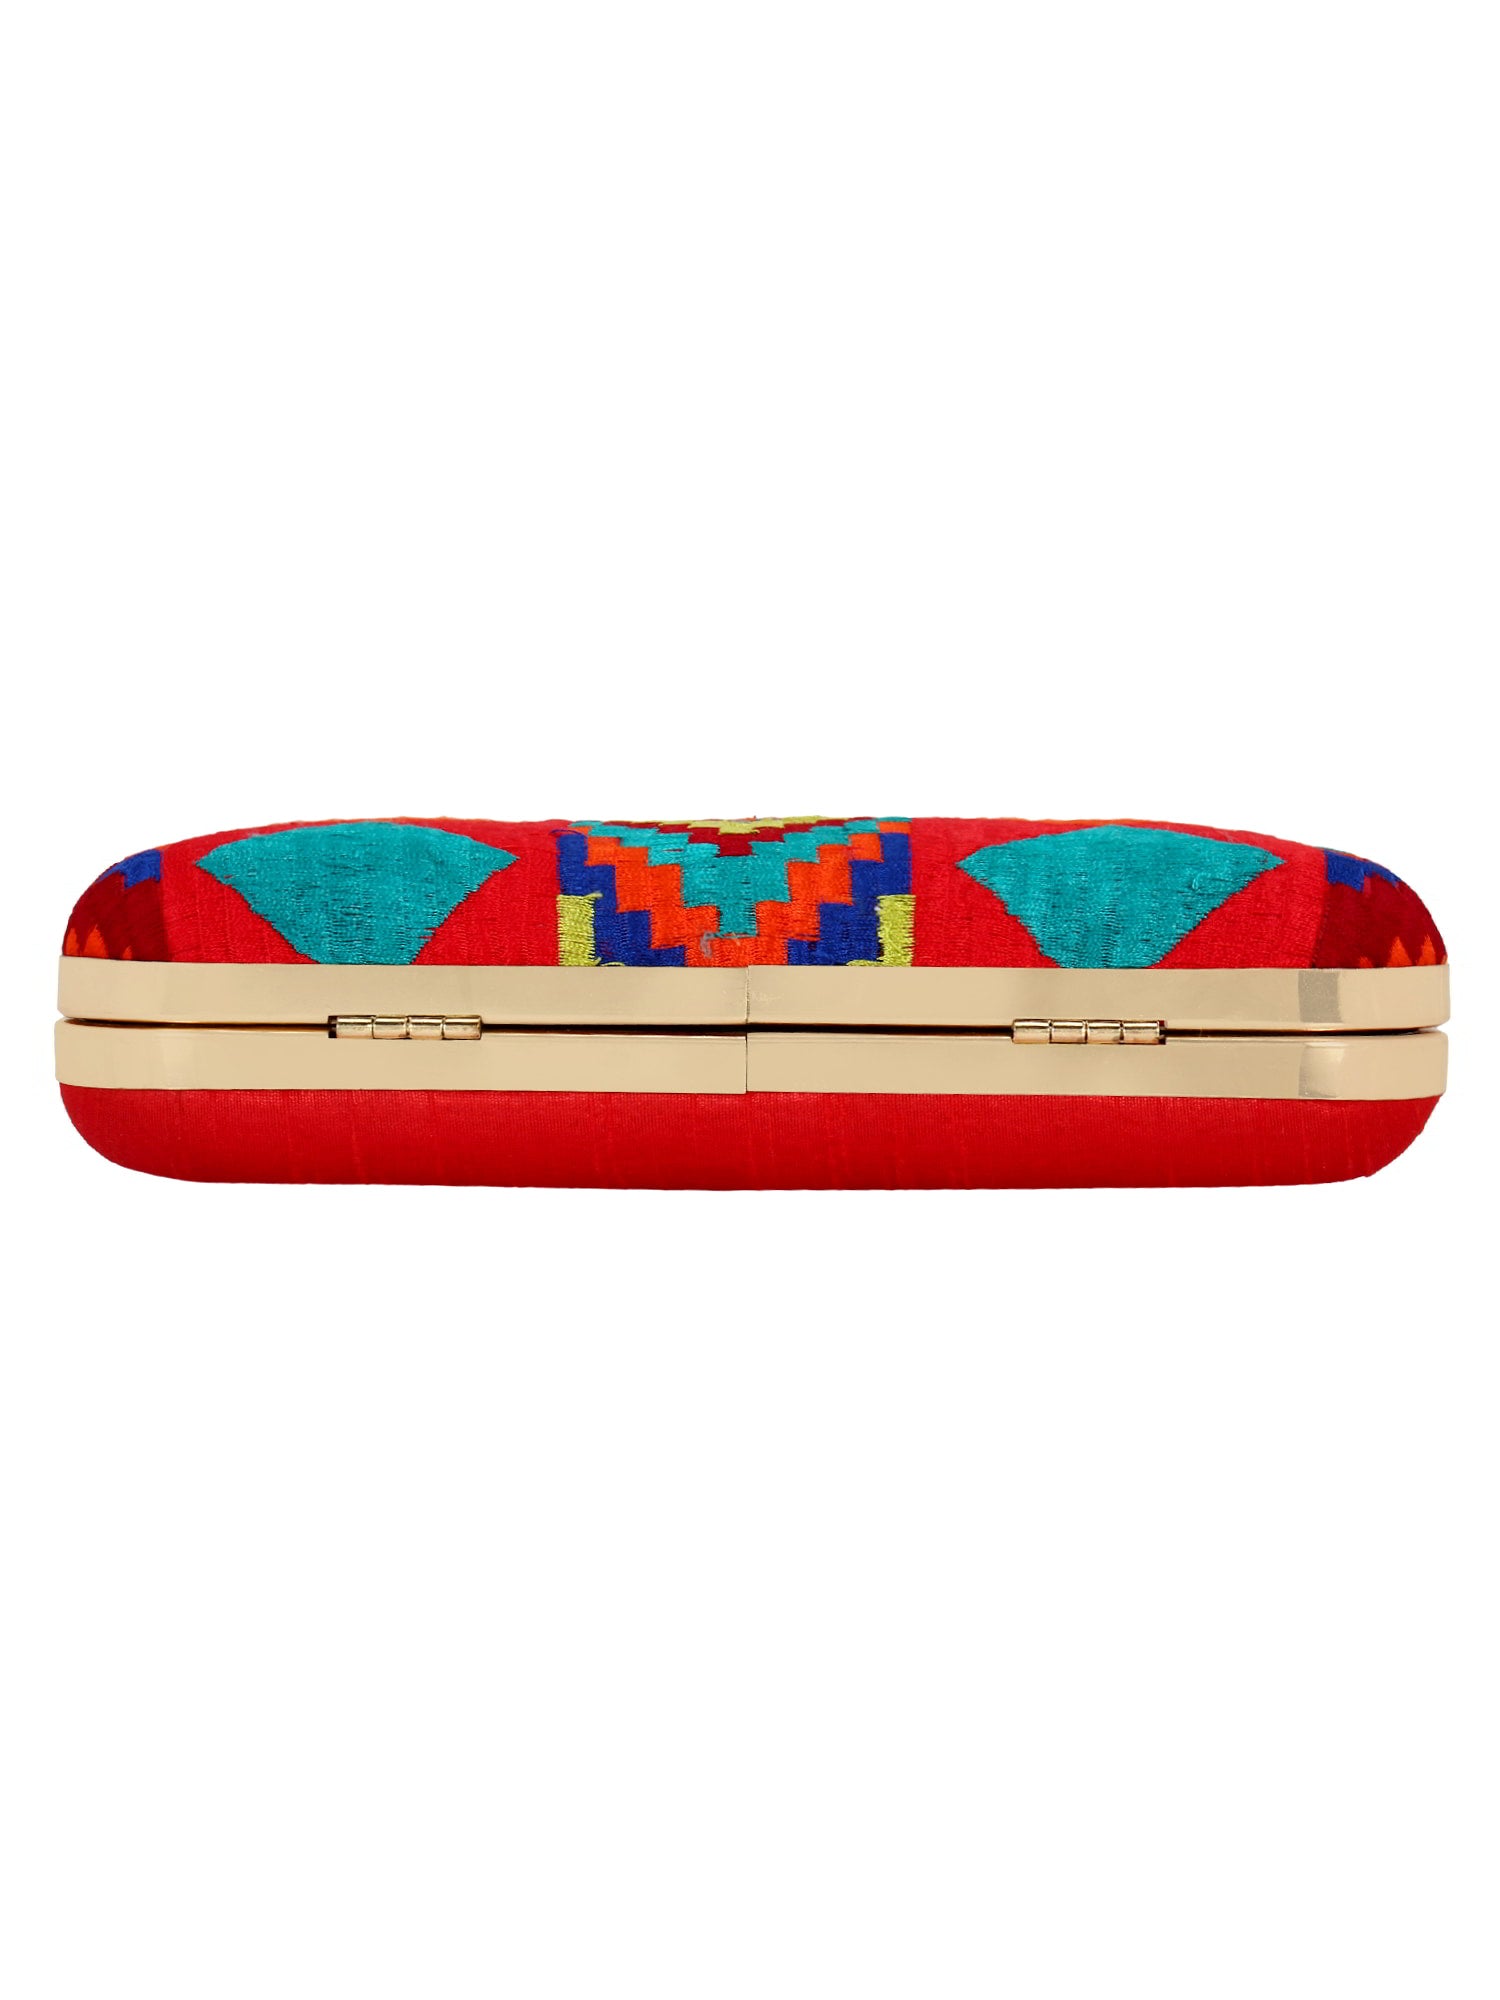 Hyperbole Embroidered Clutch